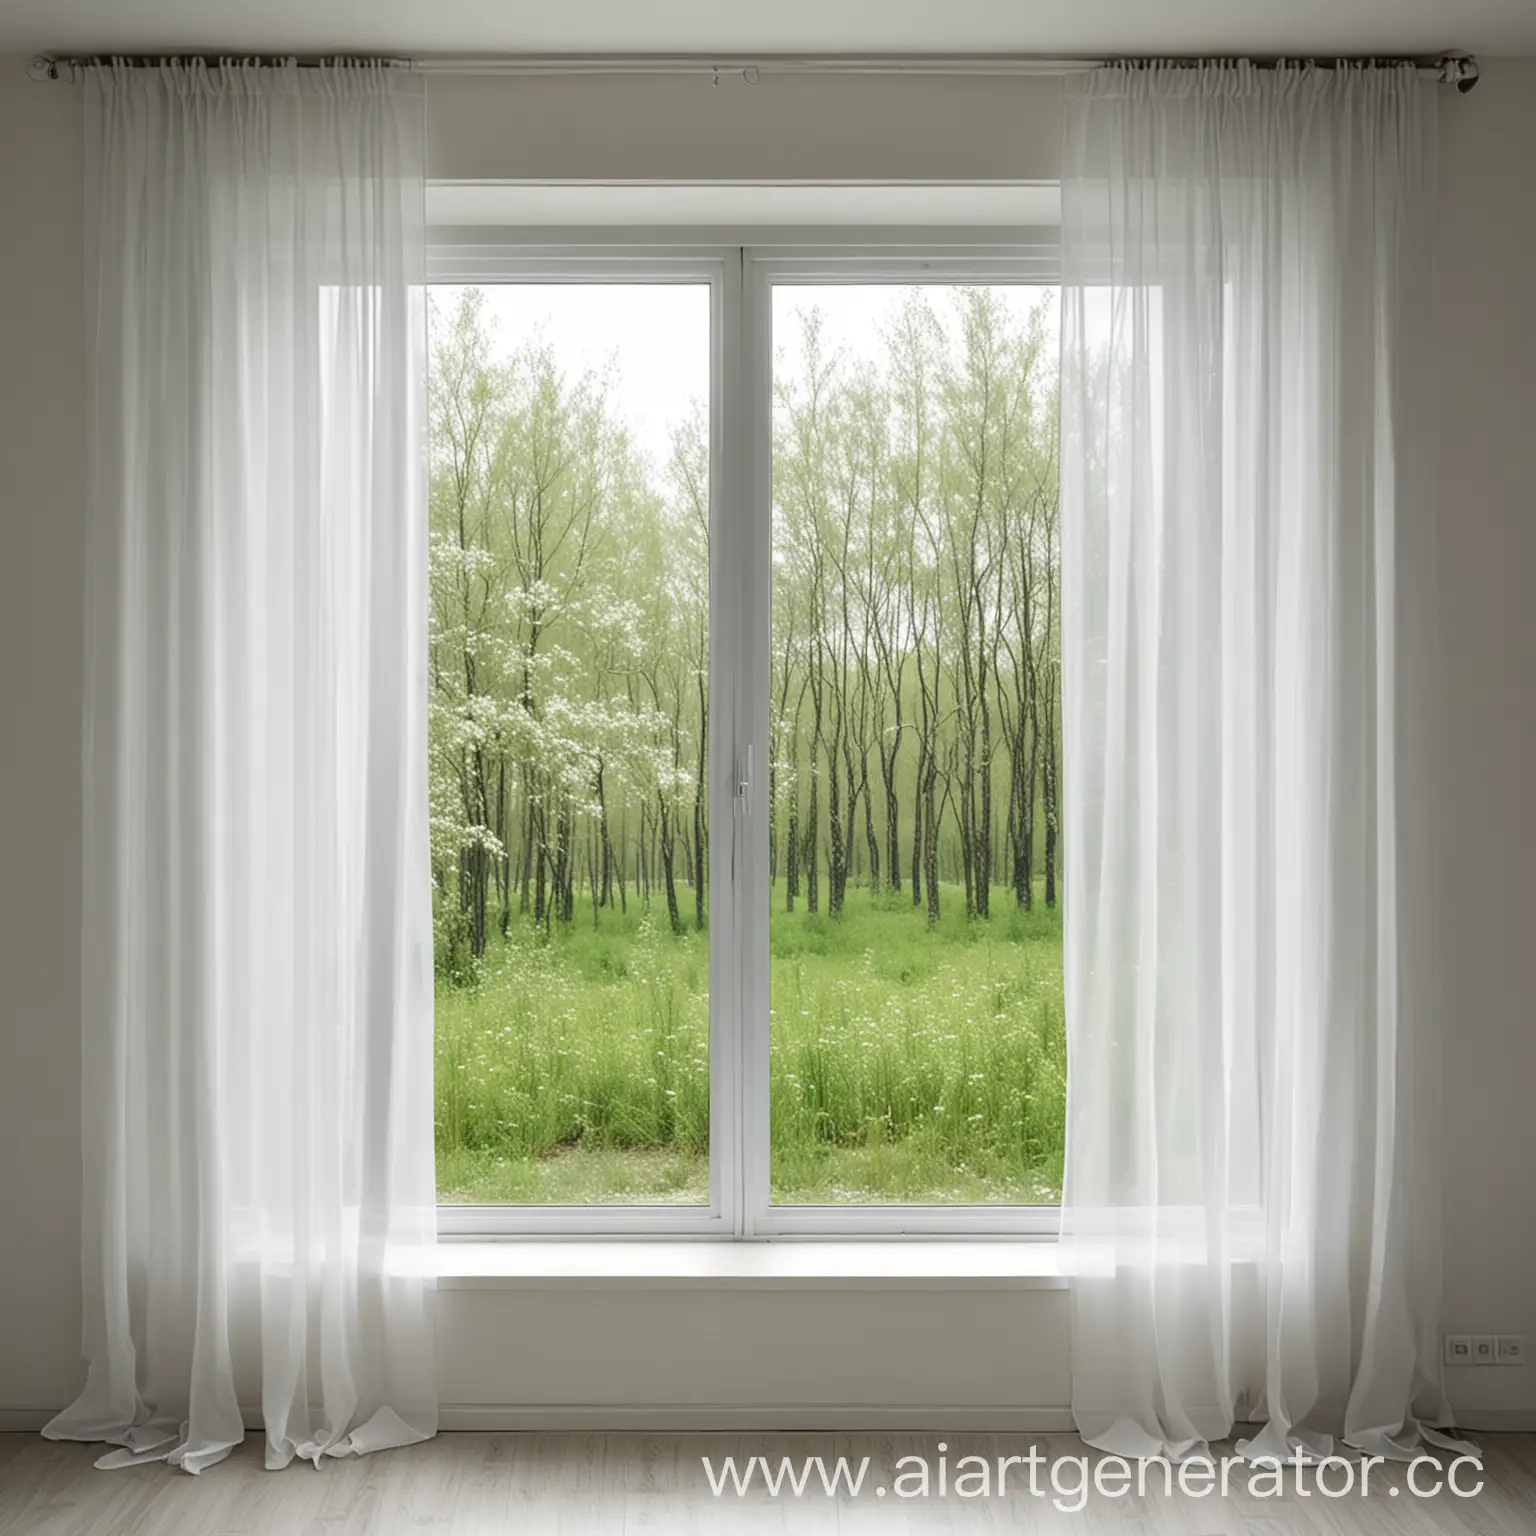 Scenic-View-through-Fluttering-White-Curtains-Captivating-Nature-Beyond-the-Window